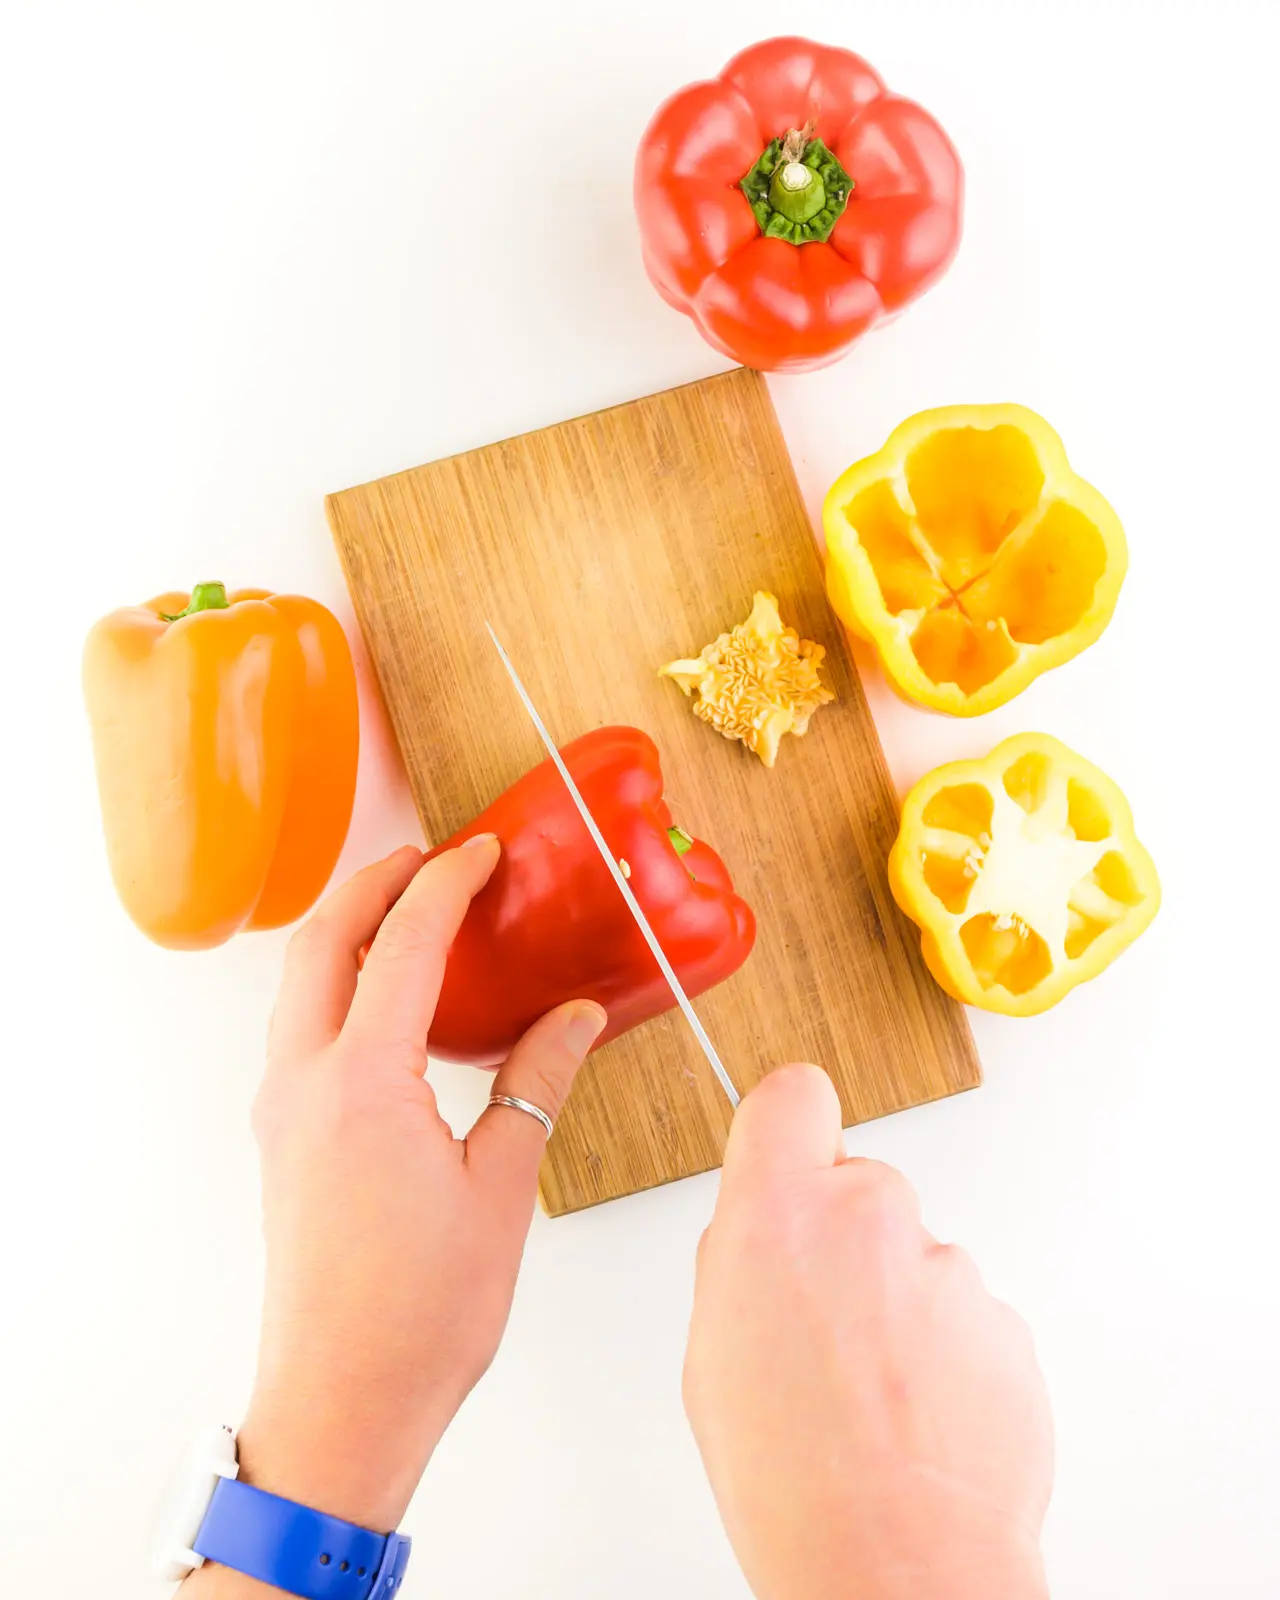 Colorful bell peppers sit on and near a cutting board. A hand holds one pepper while the other hand holds a knife, cutting the top off of it.